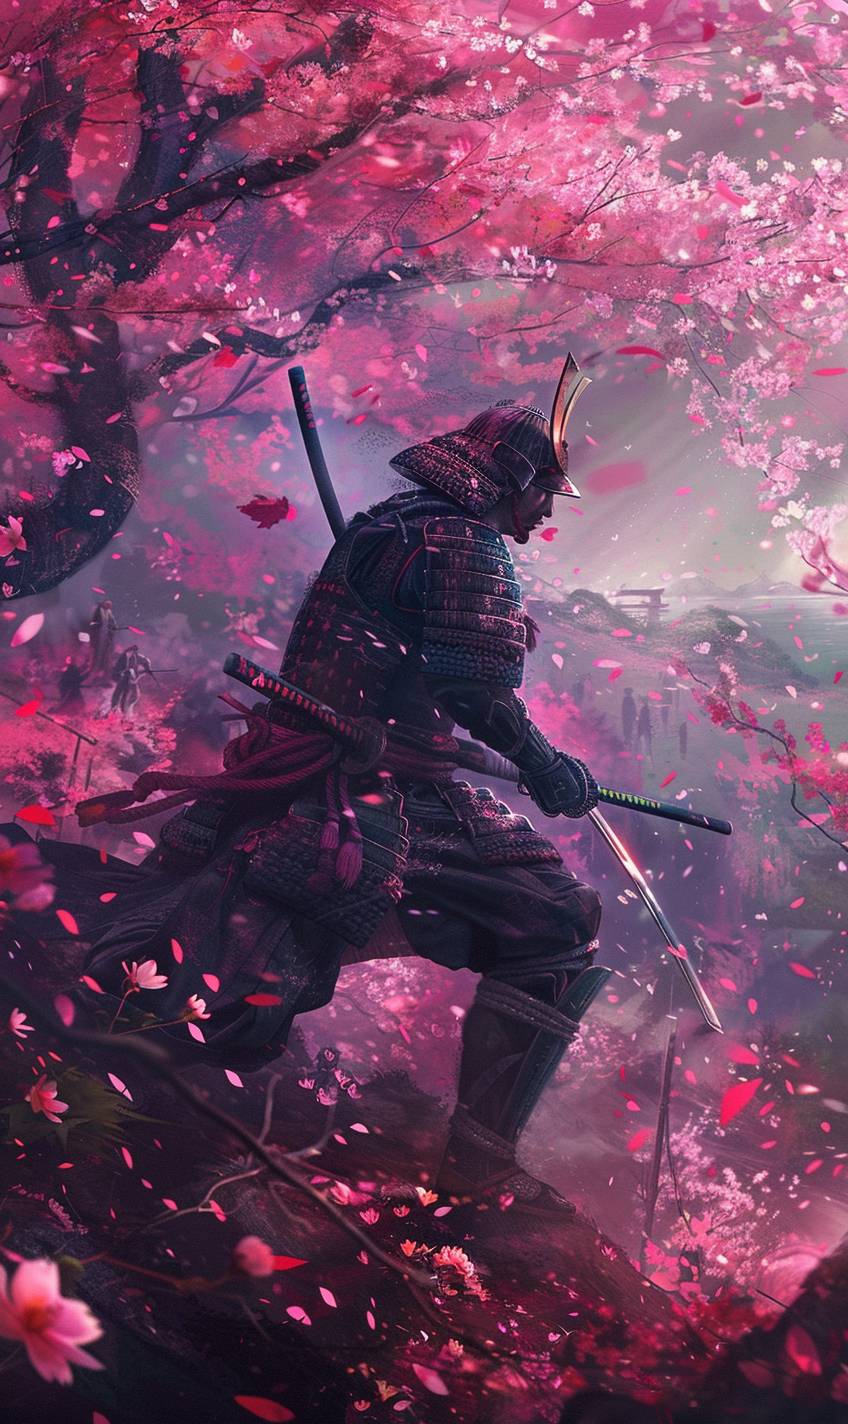 In the style of Emmanuel Shiu, a samurai warrior is training in a cherry blossom garden